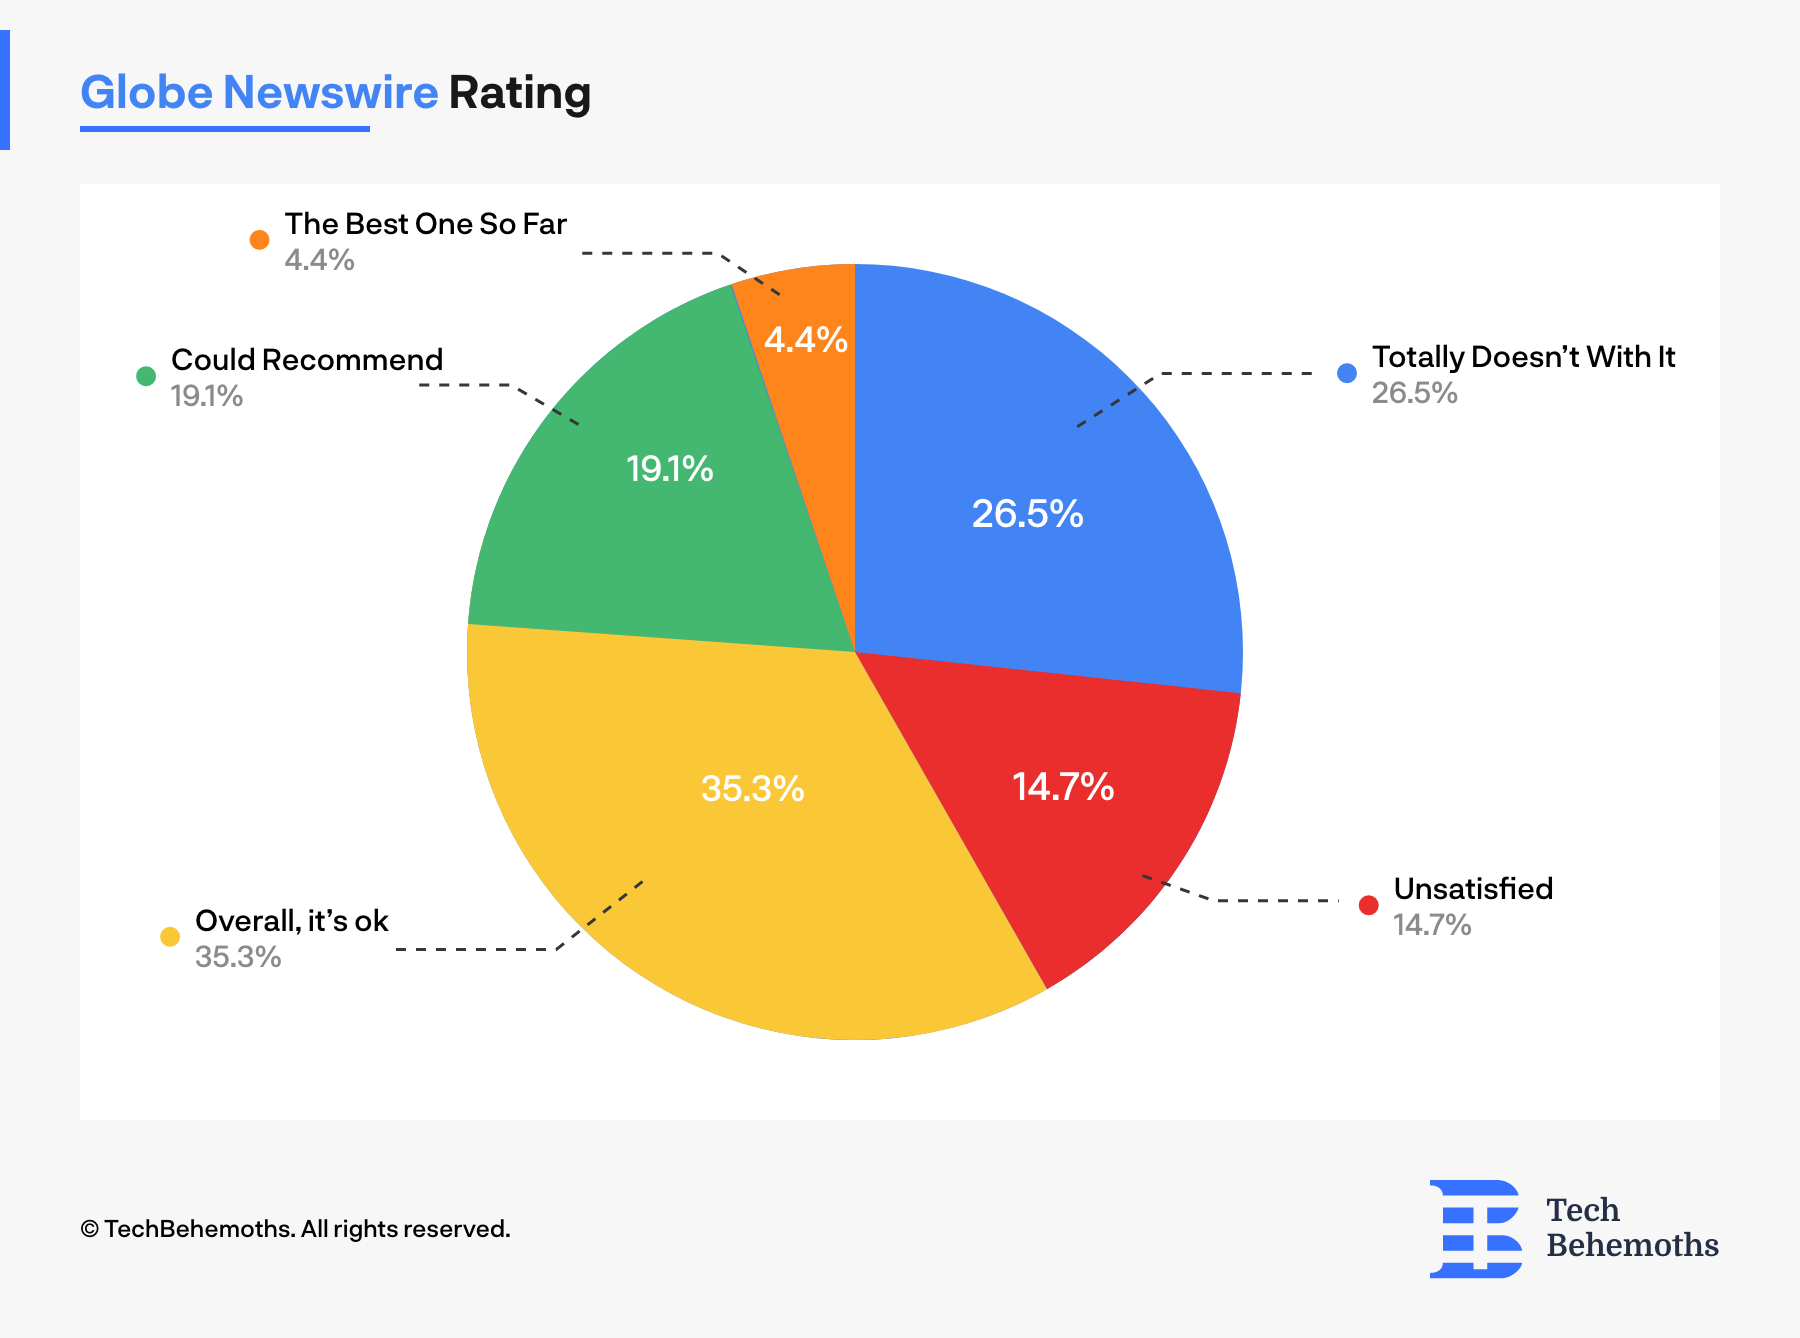 26.5 % of IT companies and digital agencies are dissapointed with Globe Newswire PR services